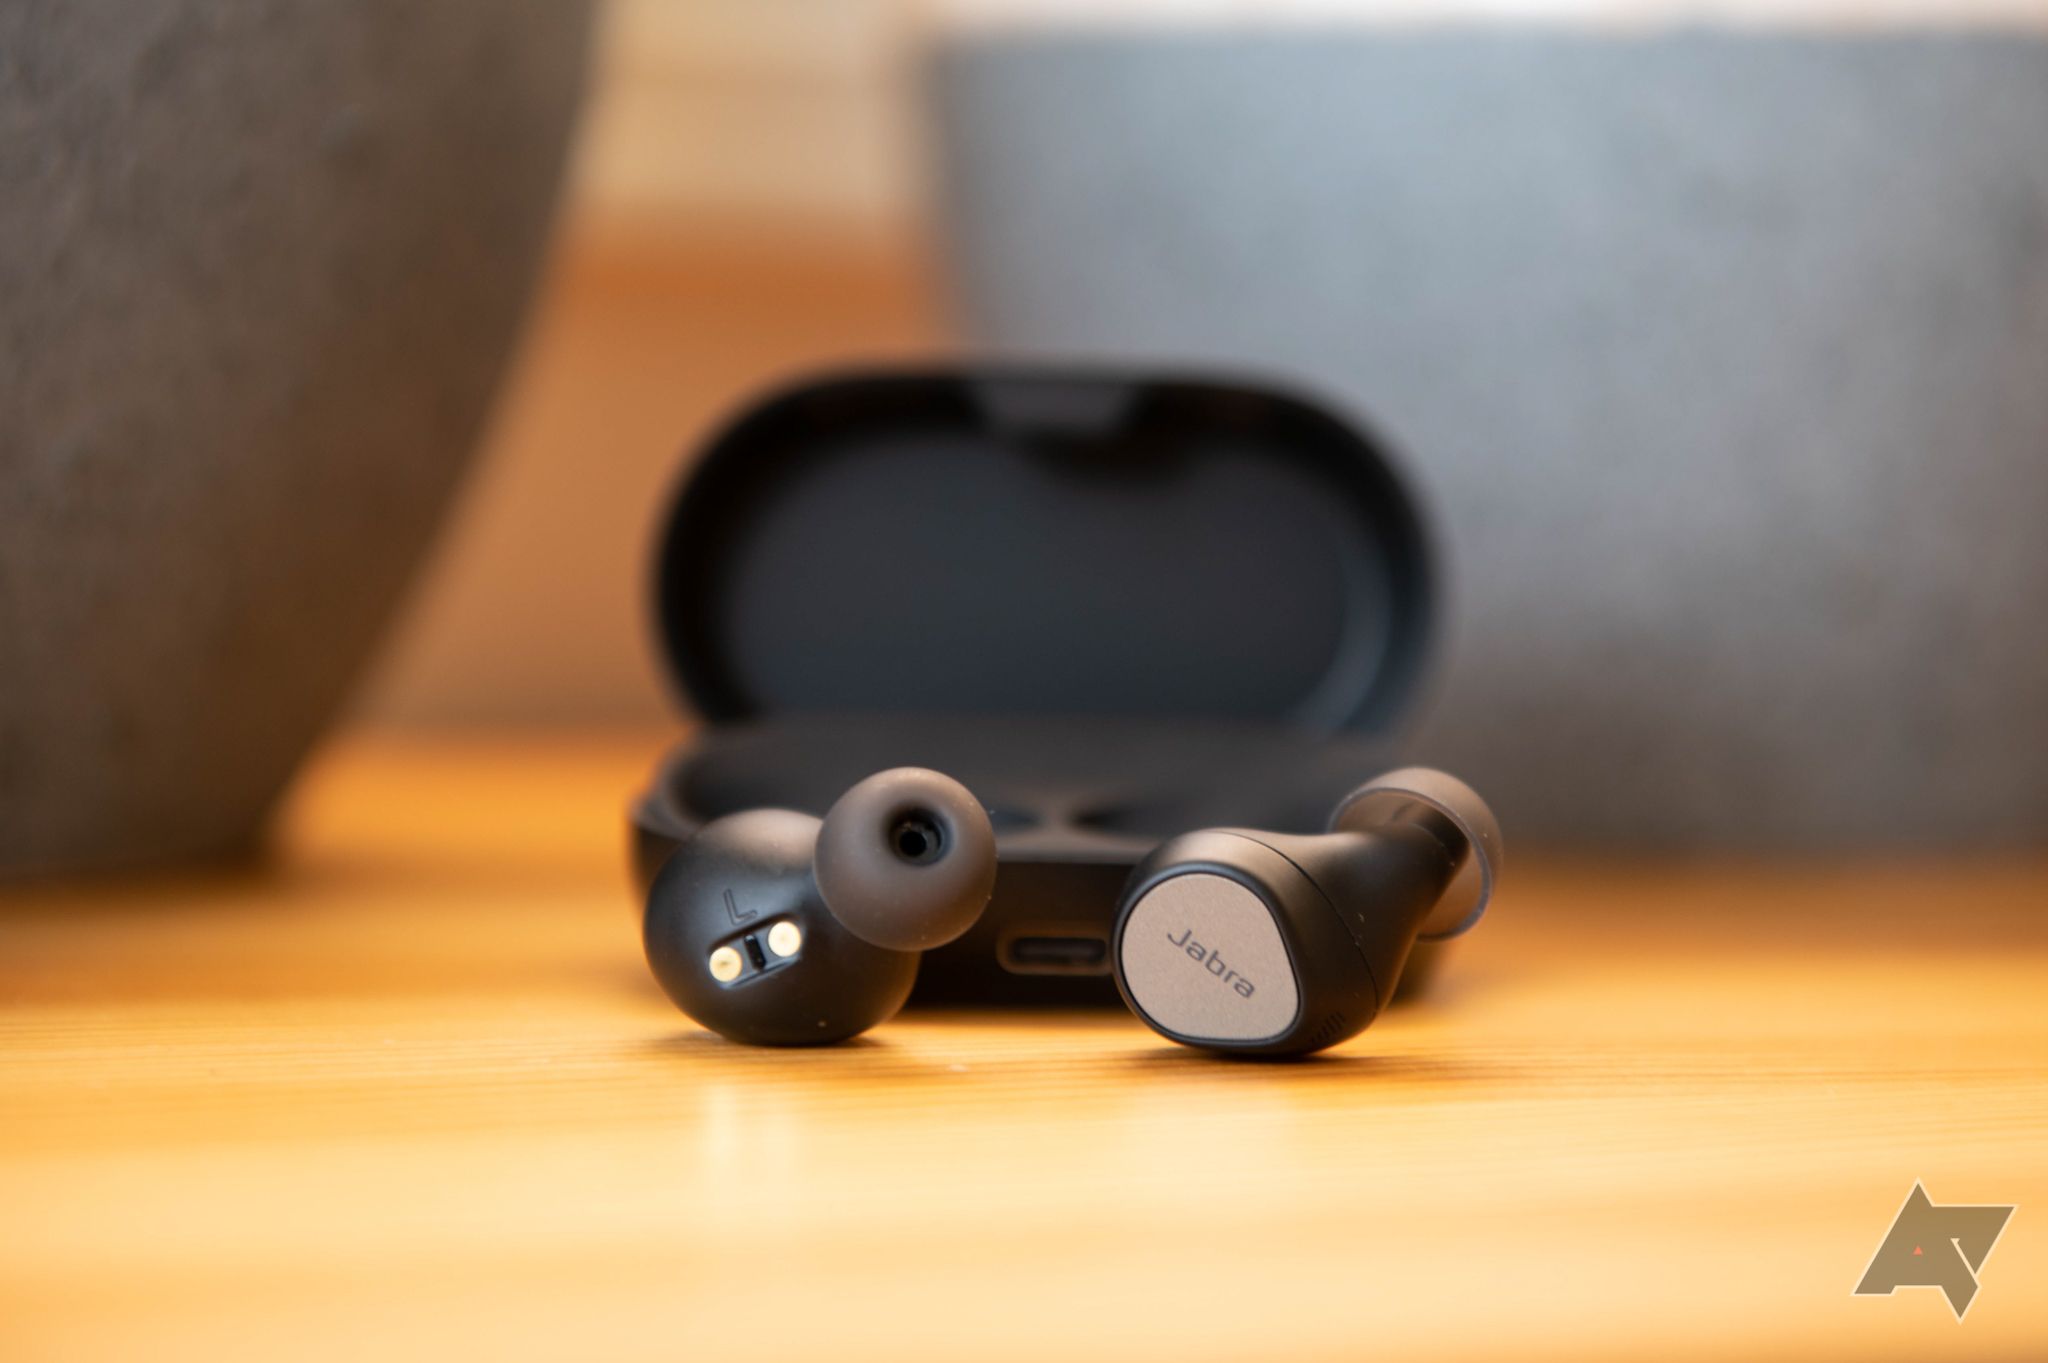 The best wireless earbuds for calls in 2022